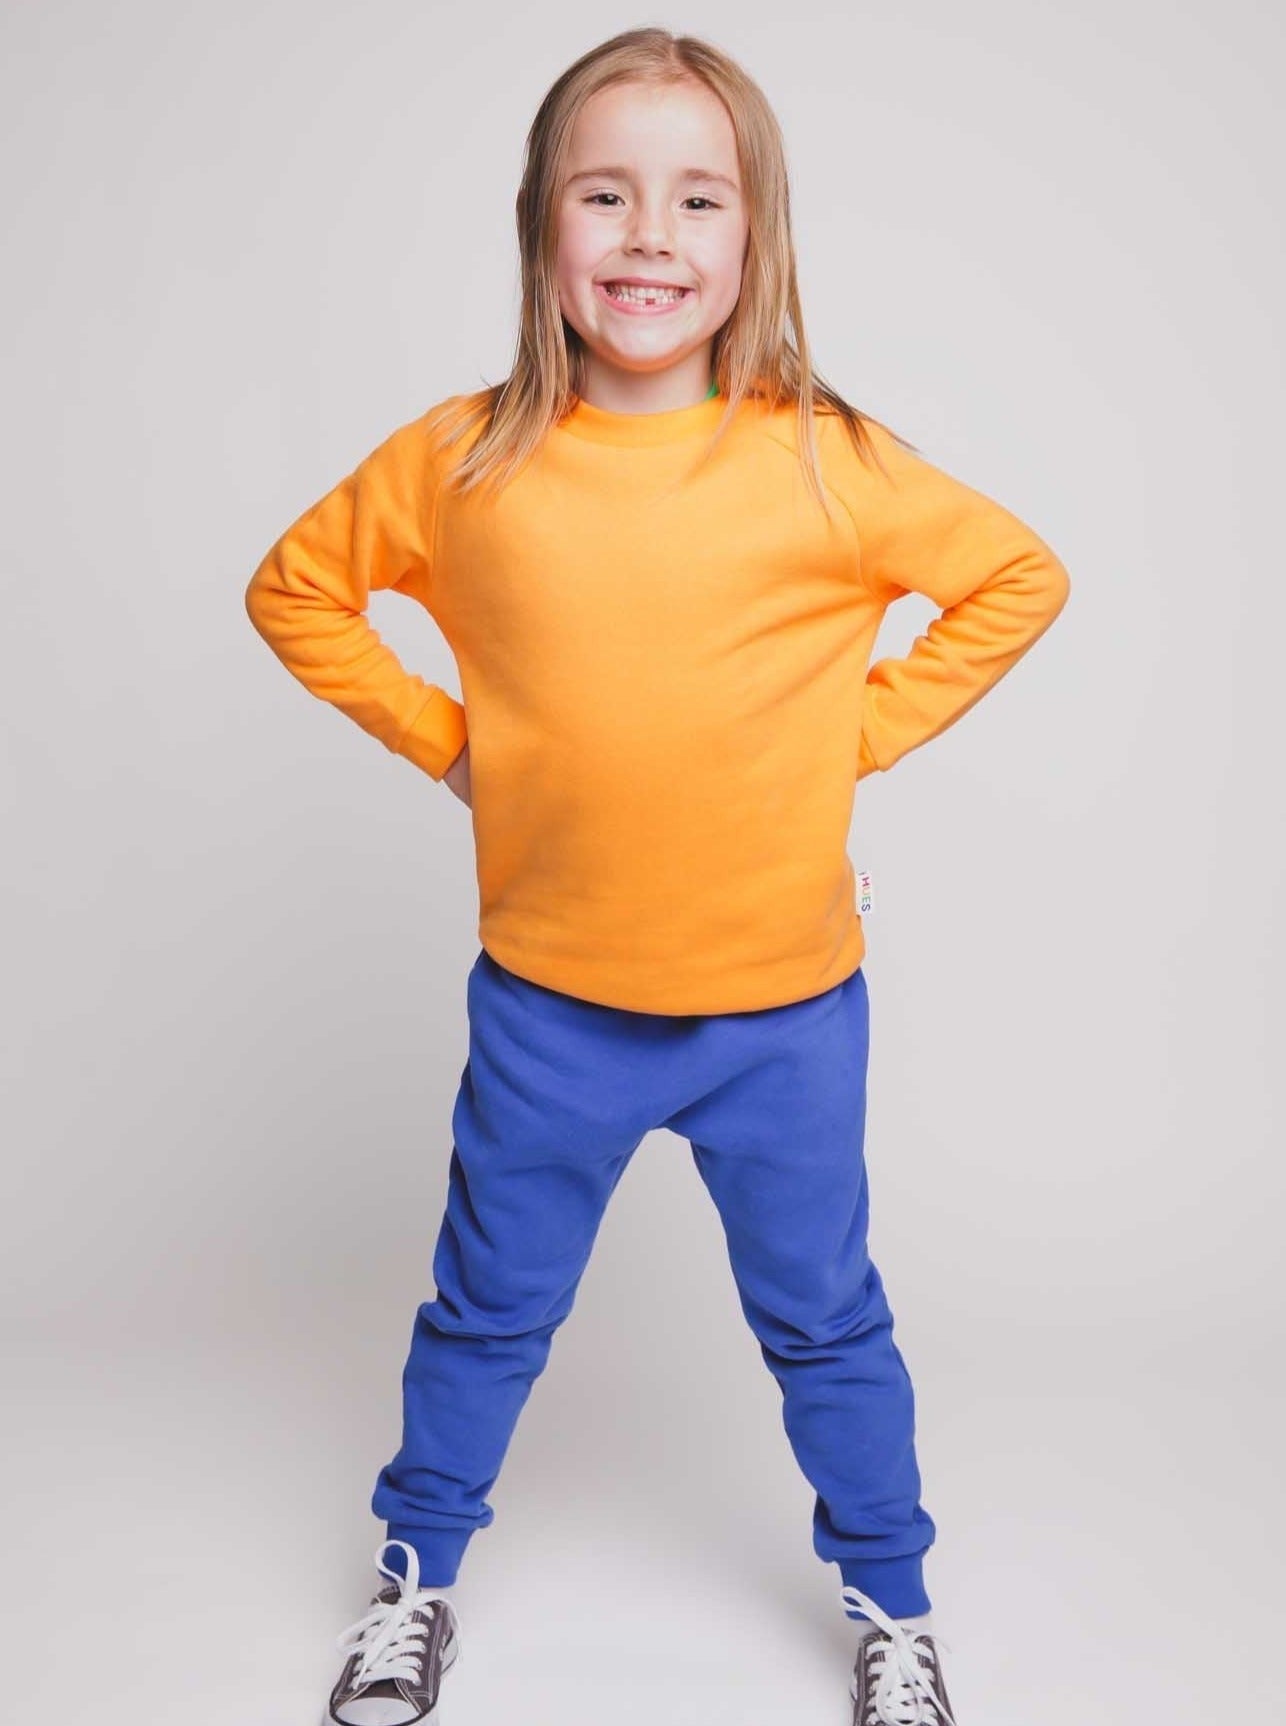 A blonde haired girl wearing an orange jumper and blue joggers - Hues Clothing